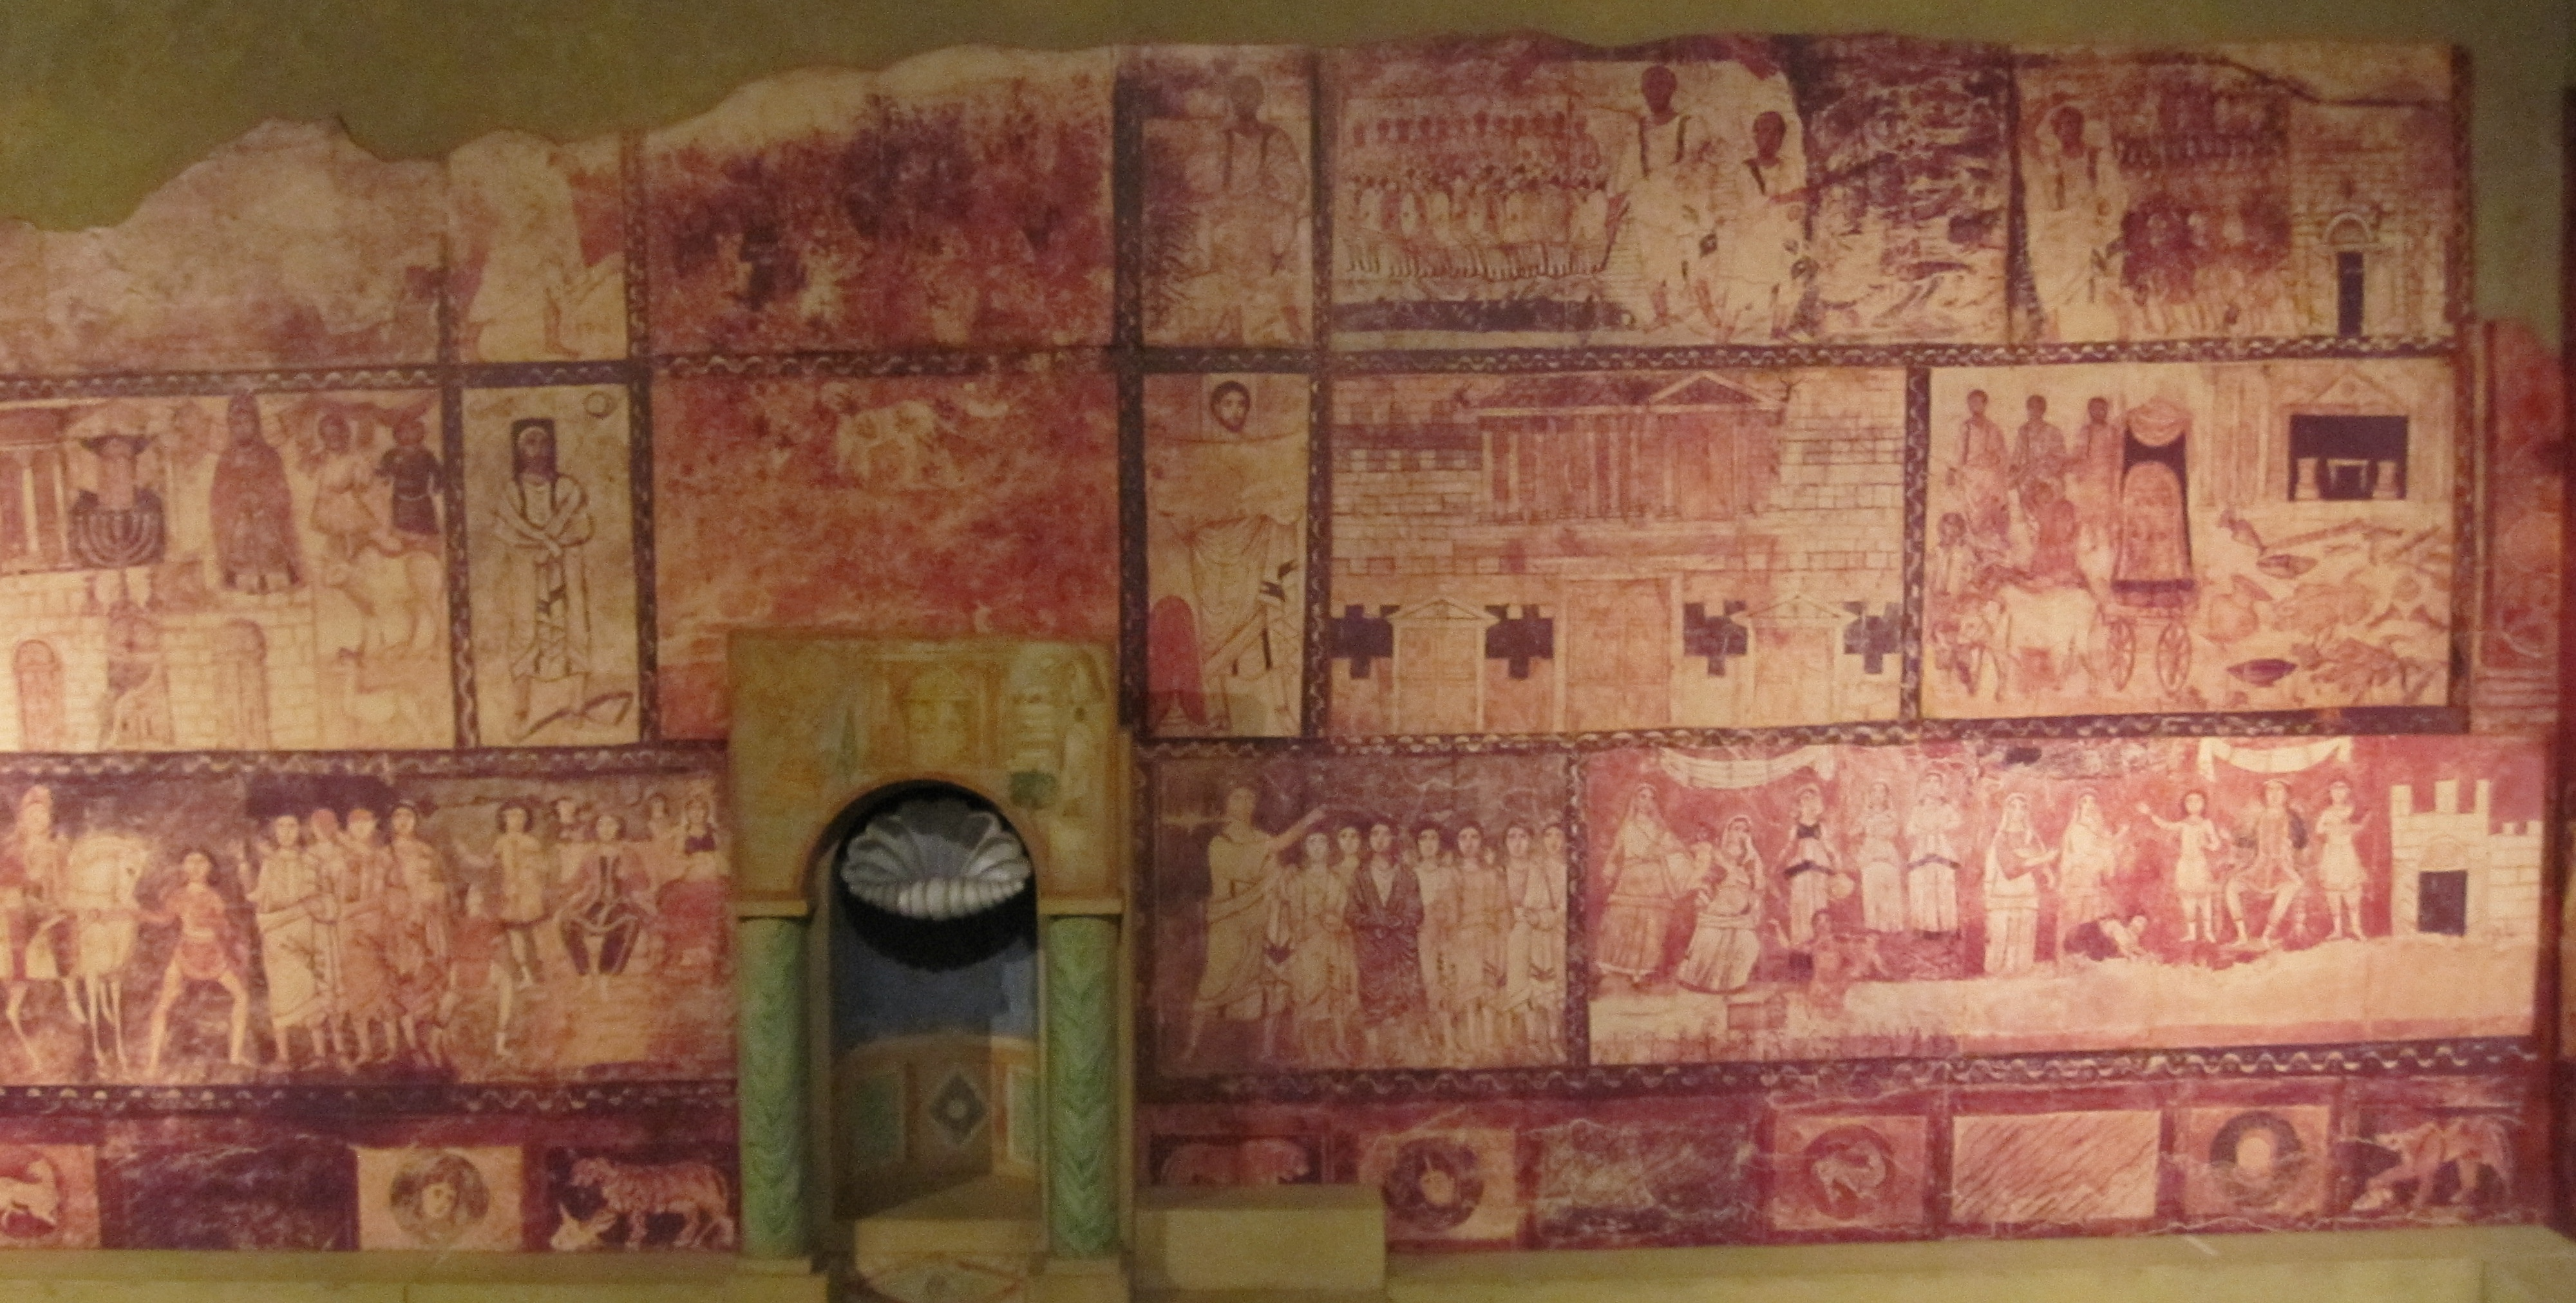 Dura-Europos Synagogue (West Wall), ca. 245 (Syria). Photo by Sodabottle, CC BY-SA 3.0.